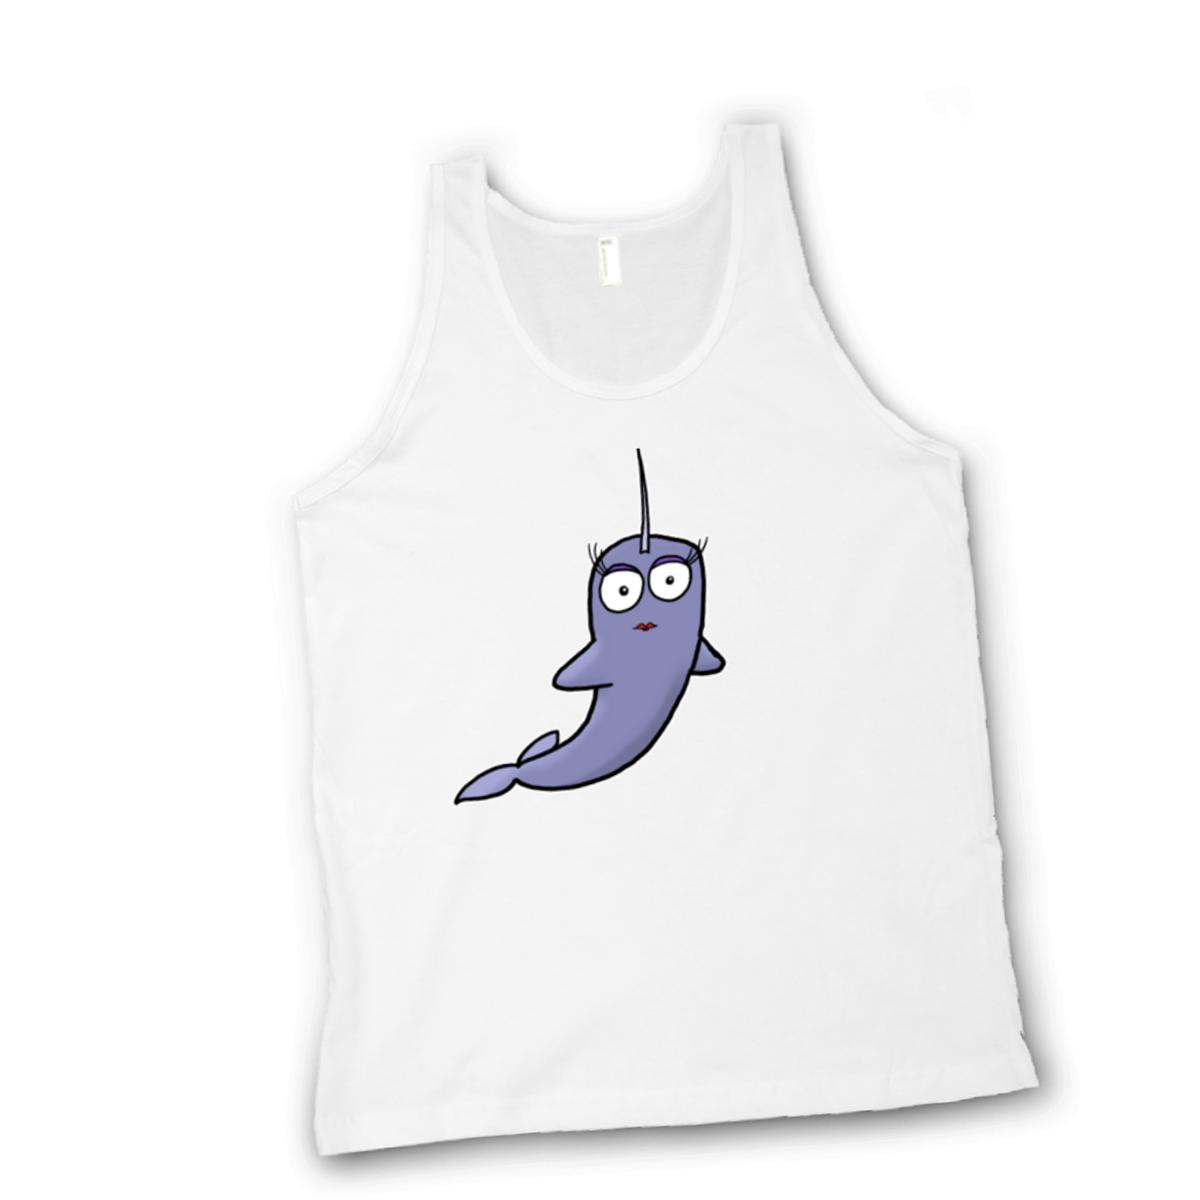 Narwhal Unisex Tank Top Small white